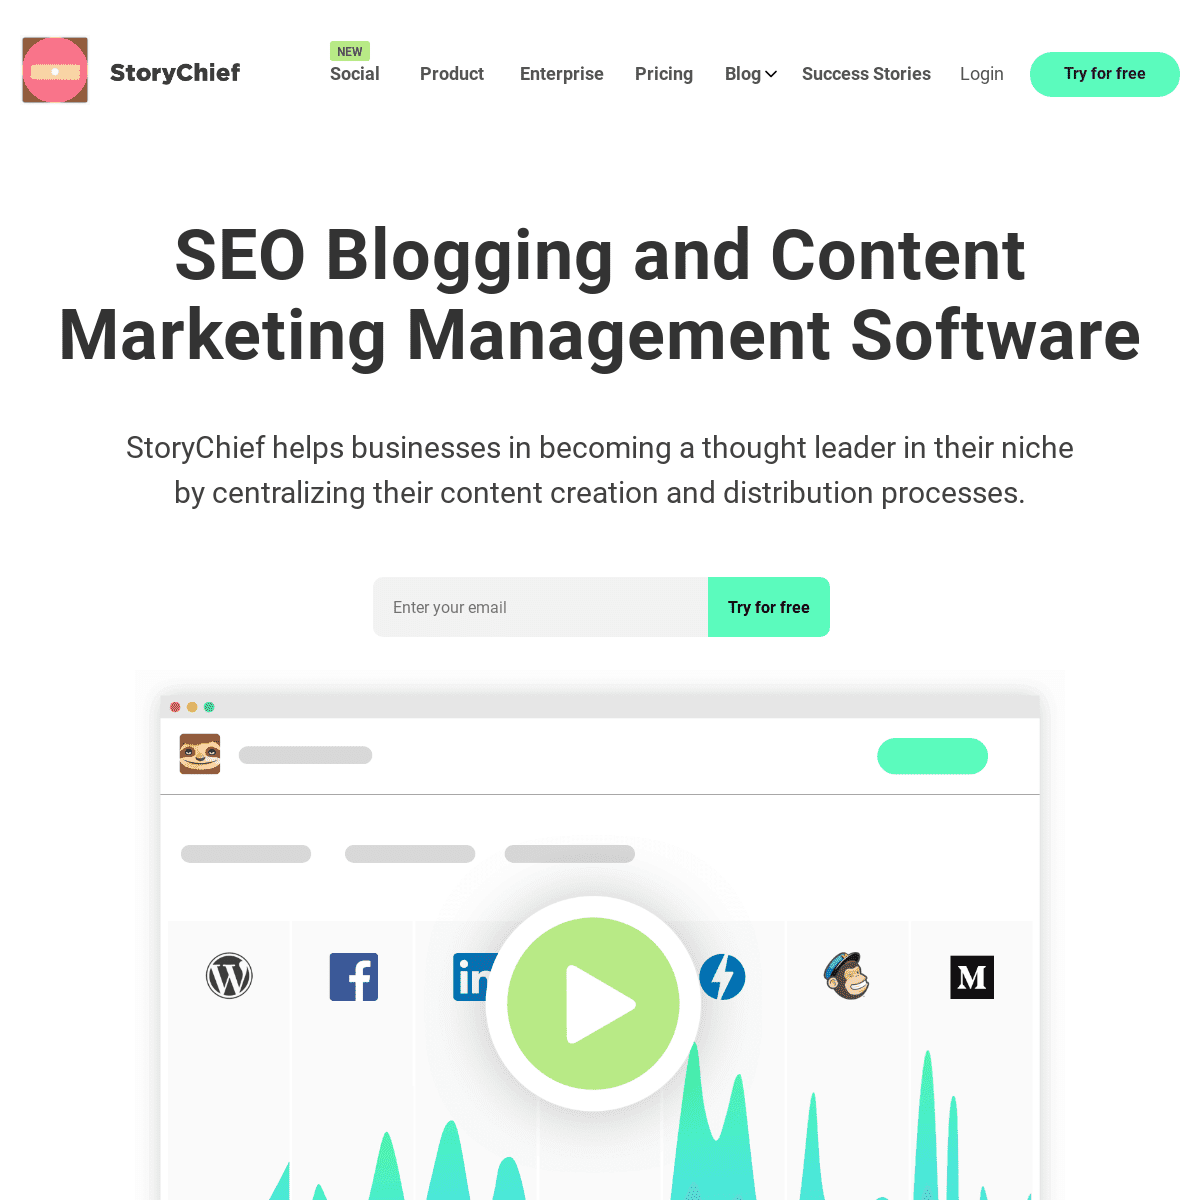 StoryChief: SEO Blogging and Content Marketing Management Software